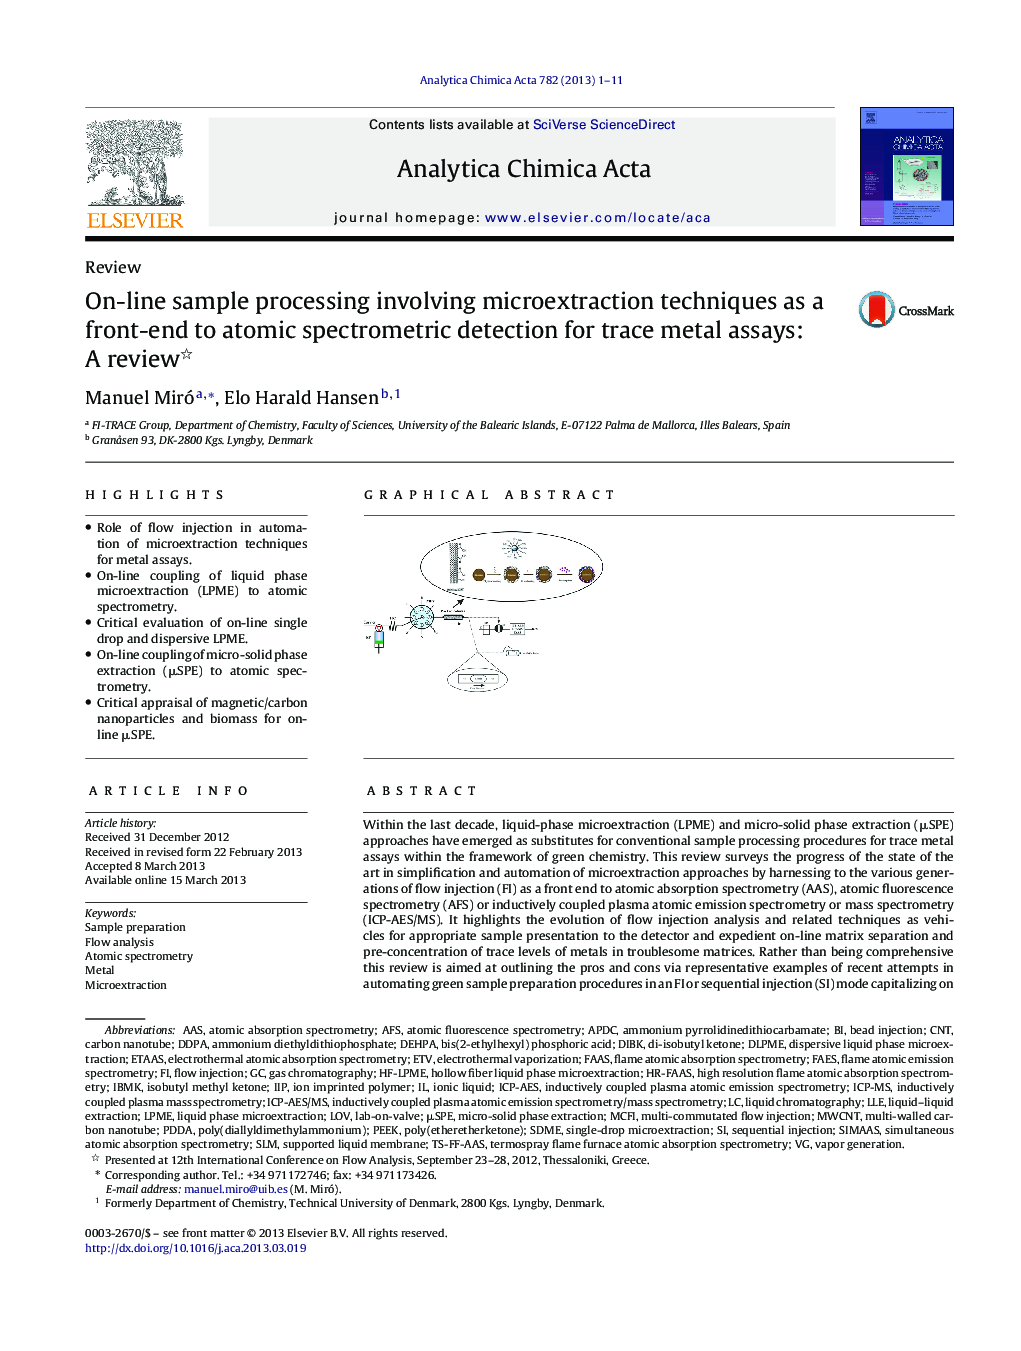 On-line sample processing involving microextraction techniques as a front-end to atomic spectrometric detection for trace metal assays: A review 